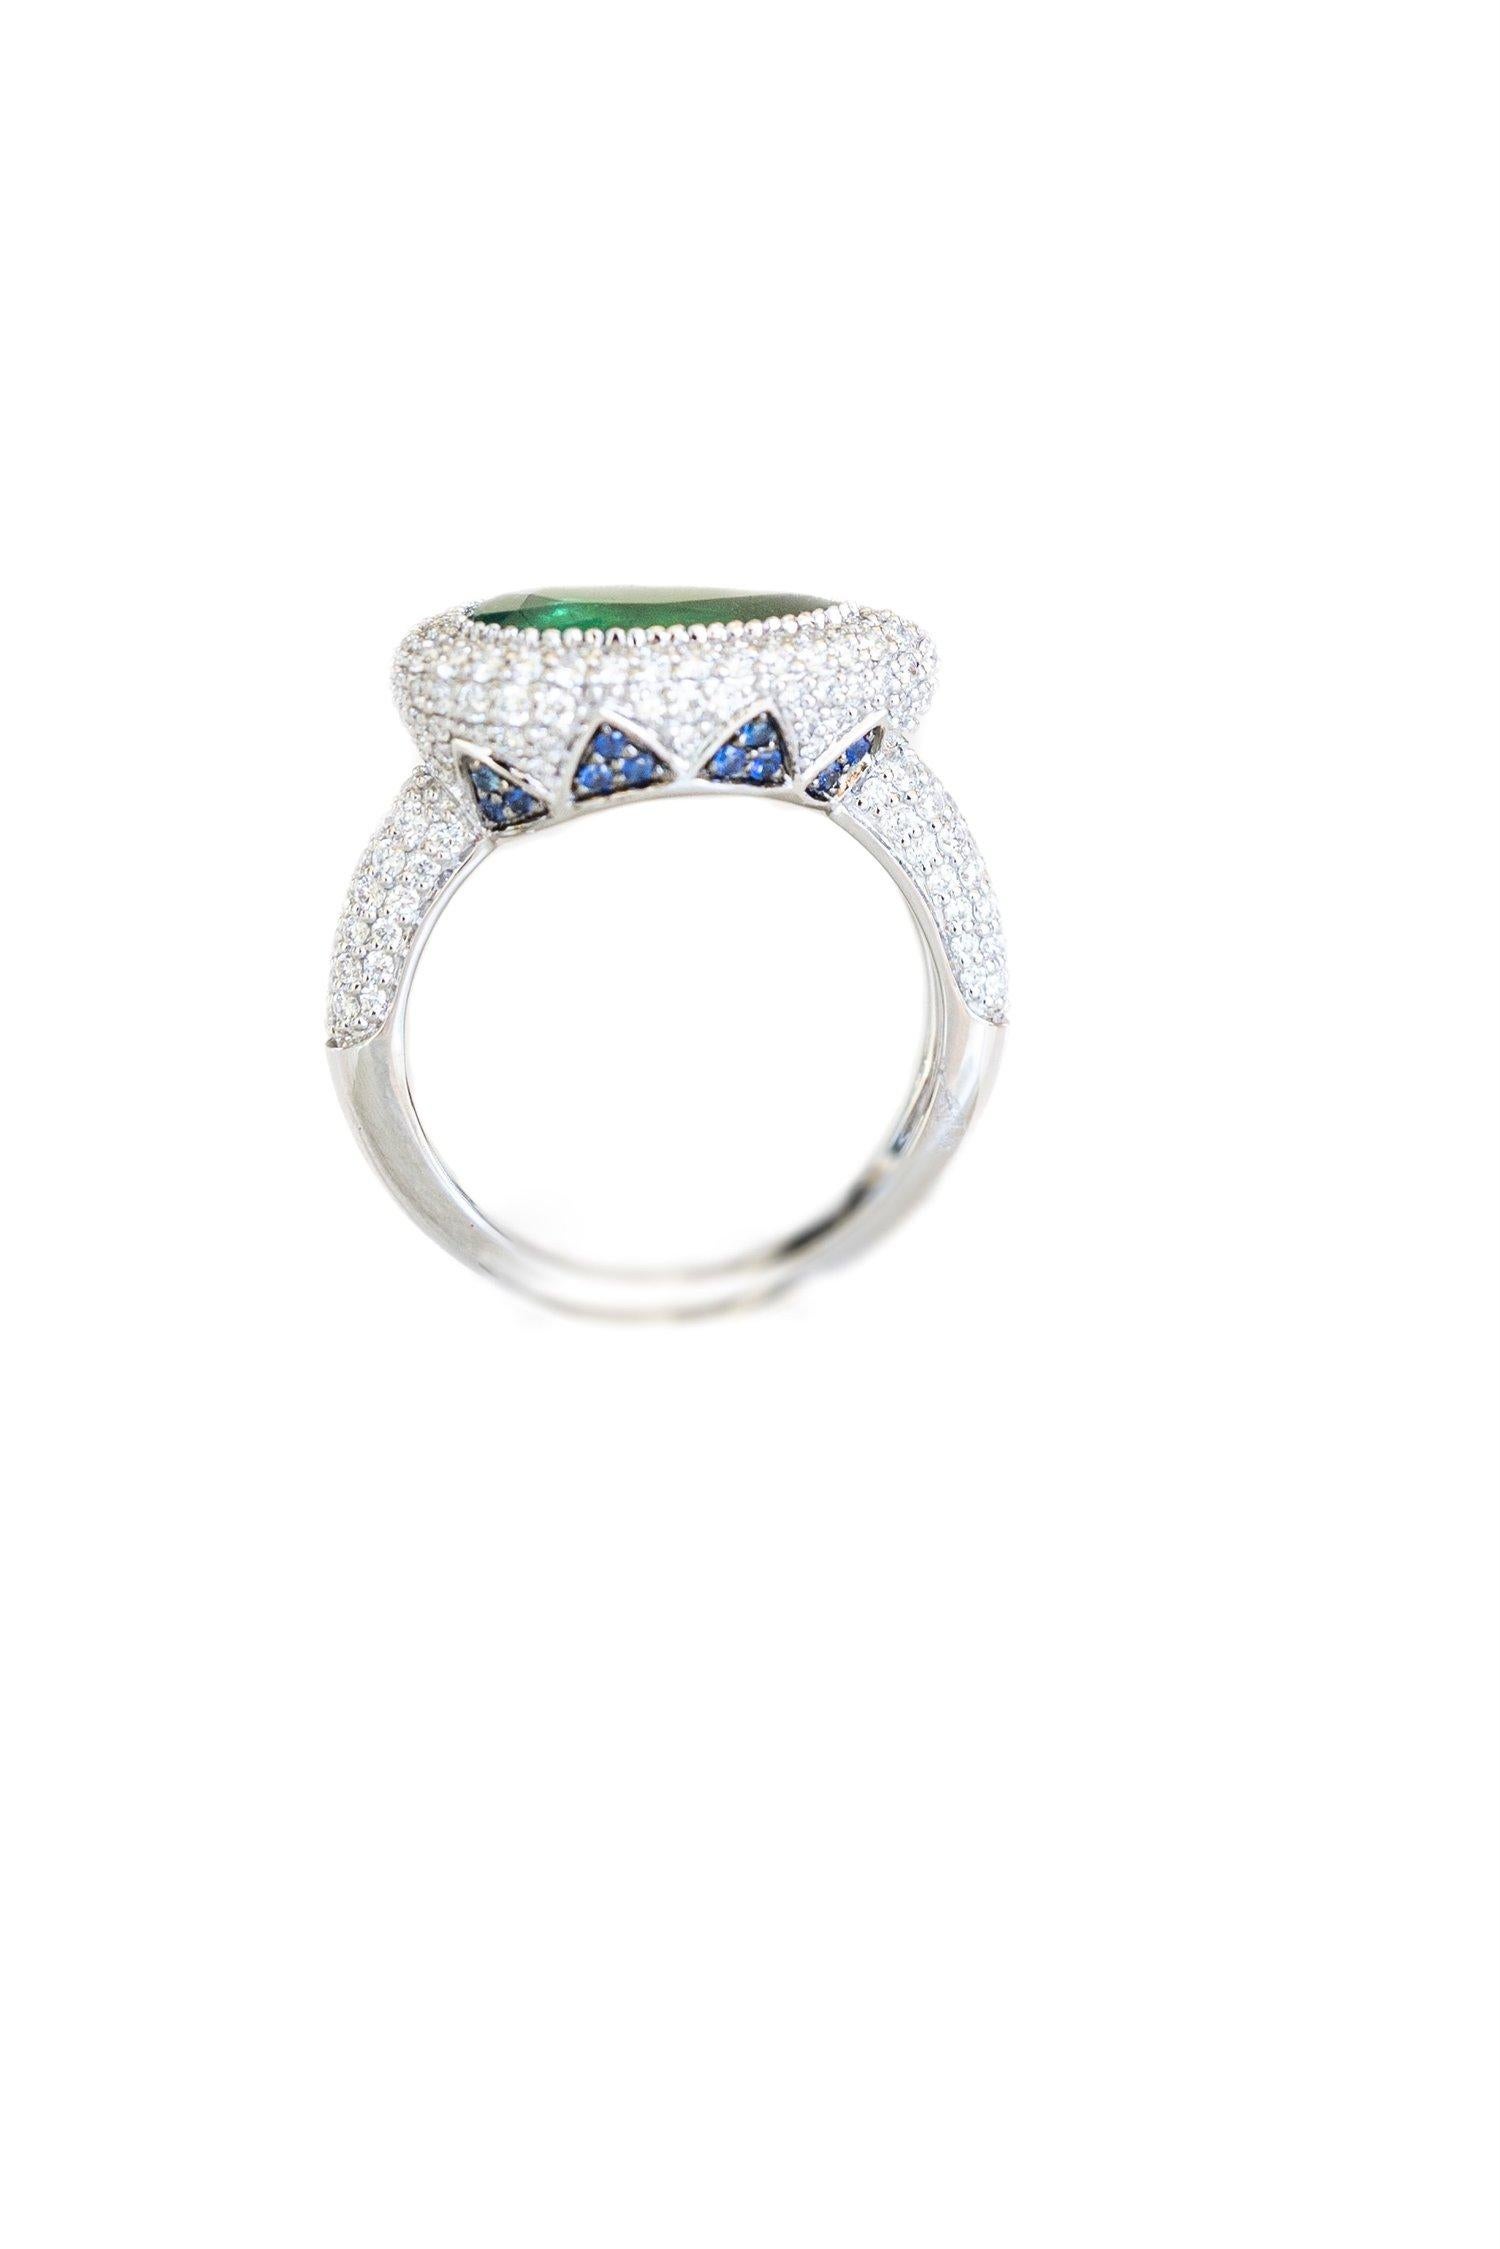 14k White Gold. These any-finger rings include a dazzling pear shaped emerald solitaire of approximately 2 cts, pave set blue sapphire petals in a lotus motif and pave set brilliant cut white diamonds. Rinoor's re-imagined rings, are incredibly